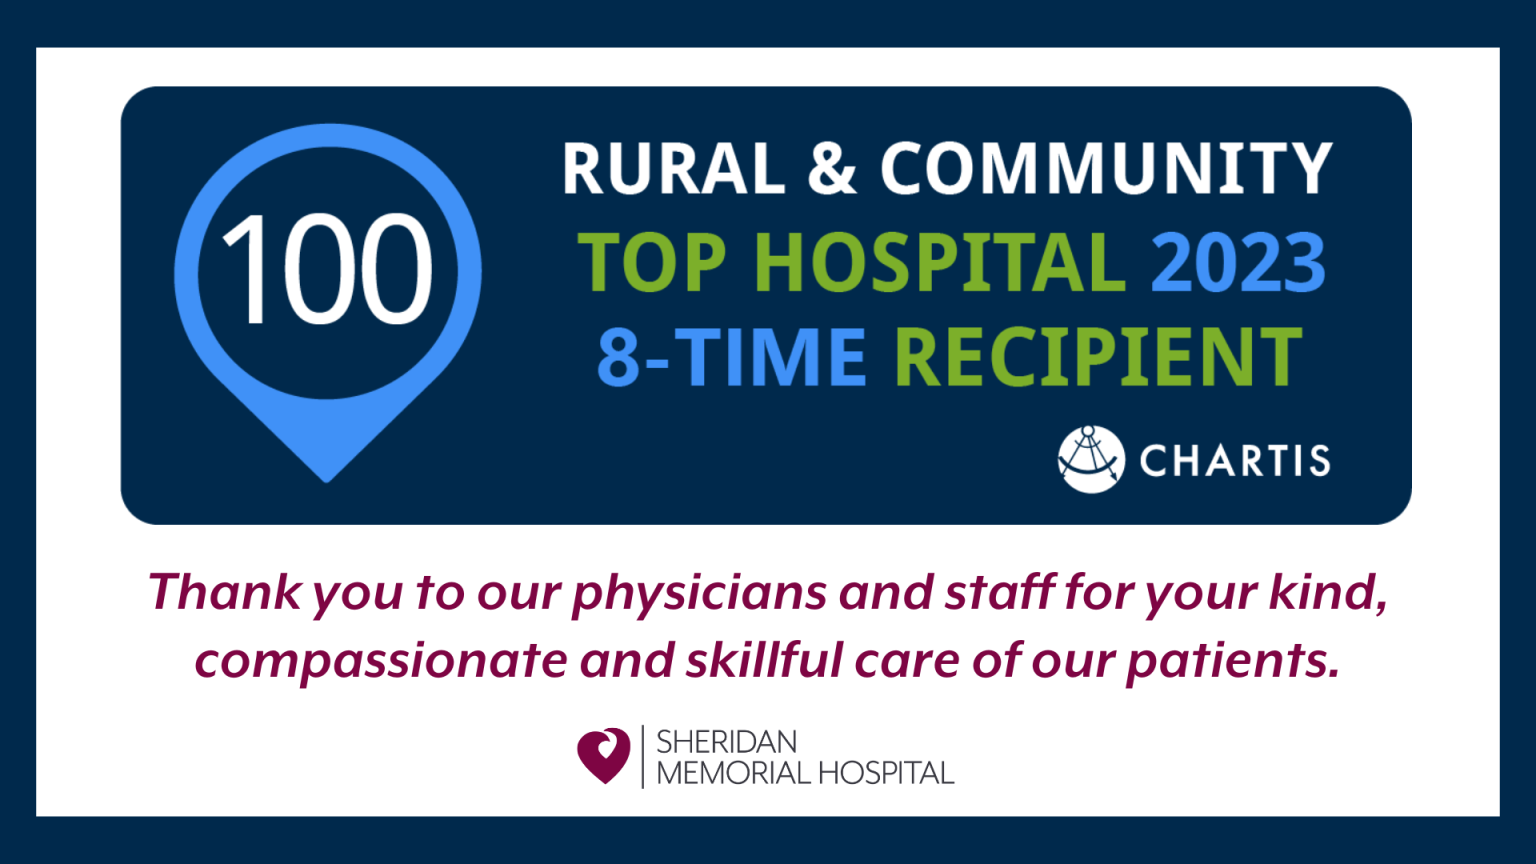 SMH Designated Top 100 Rural and Community Hospital for Eighth Straight